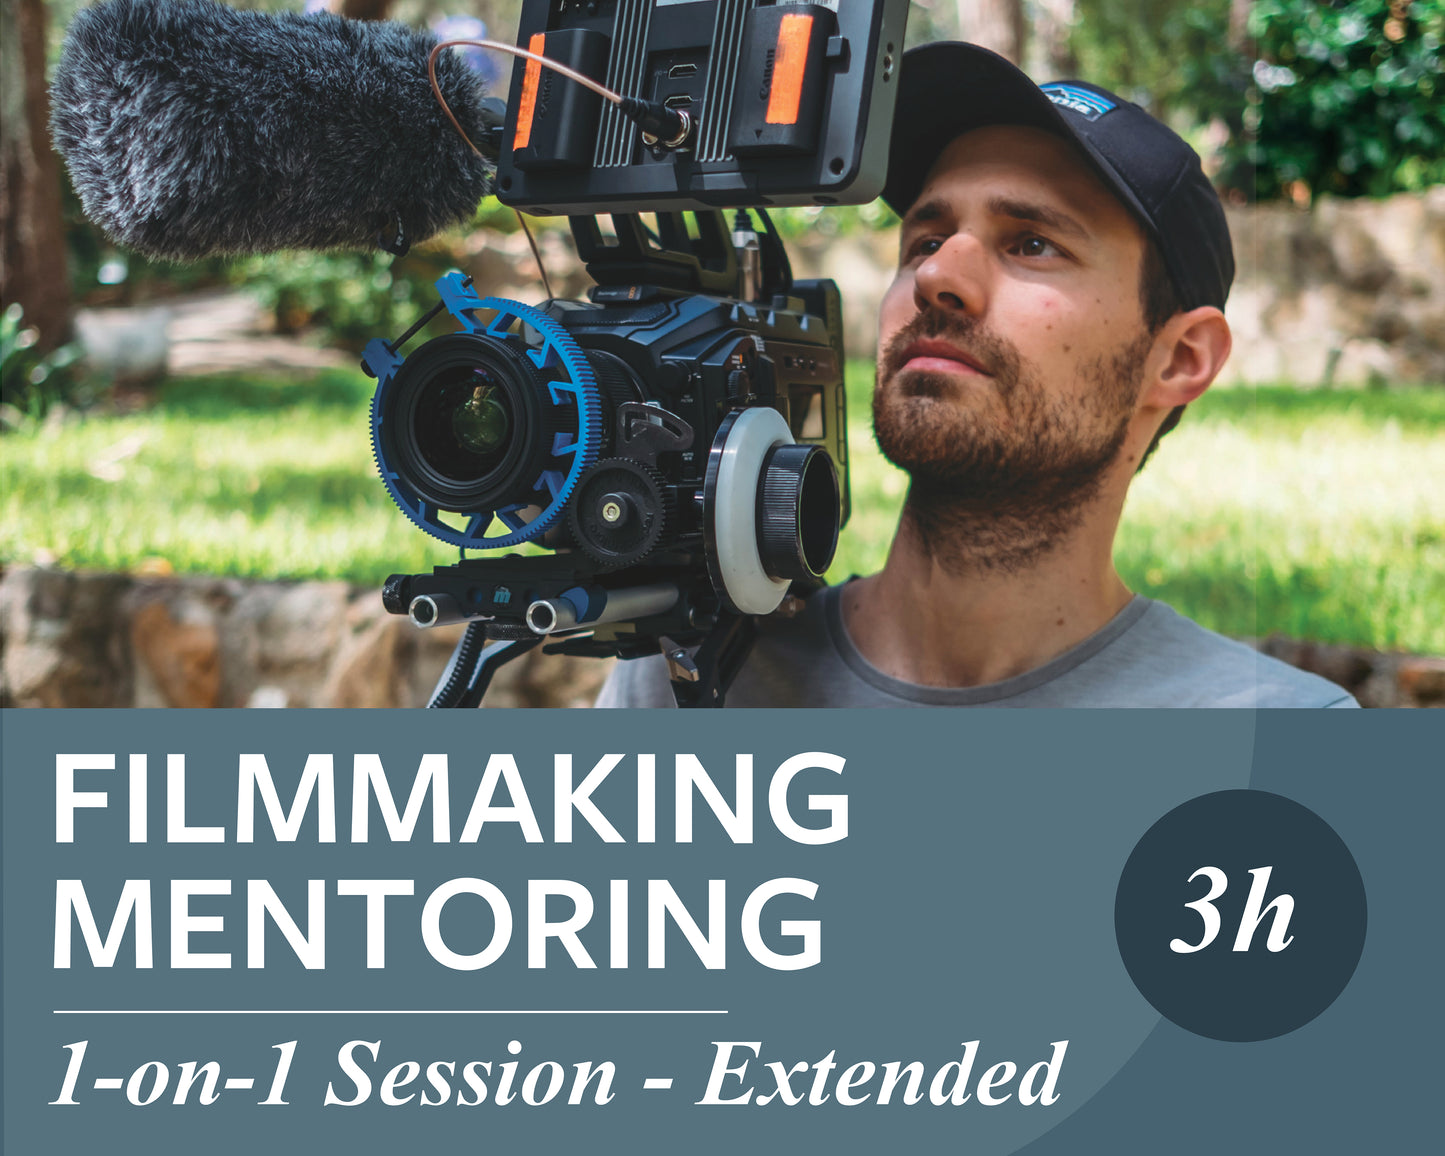 Filmmaking Mentoring Sessions - Extended (3h)